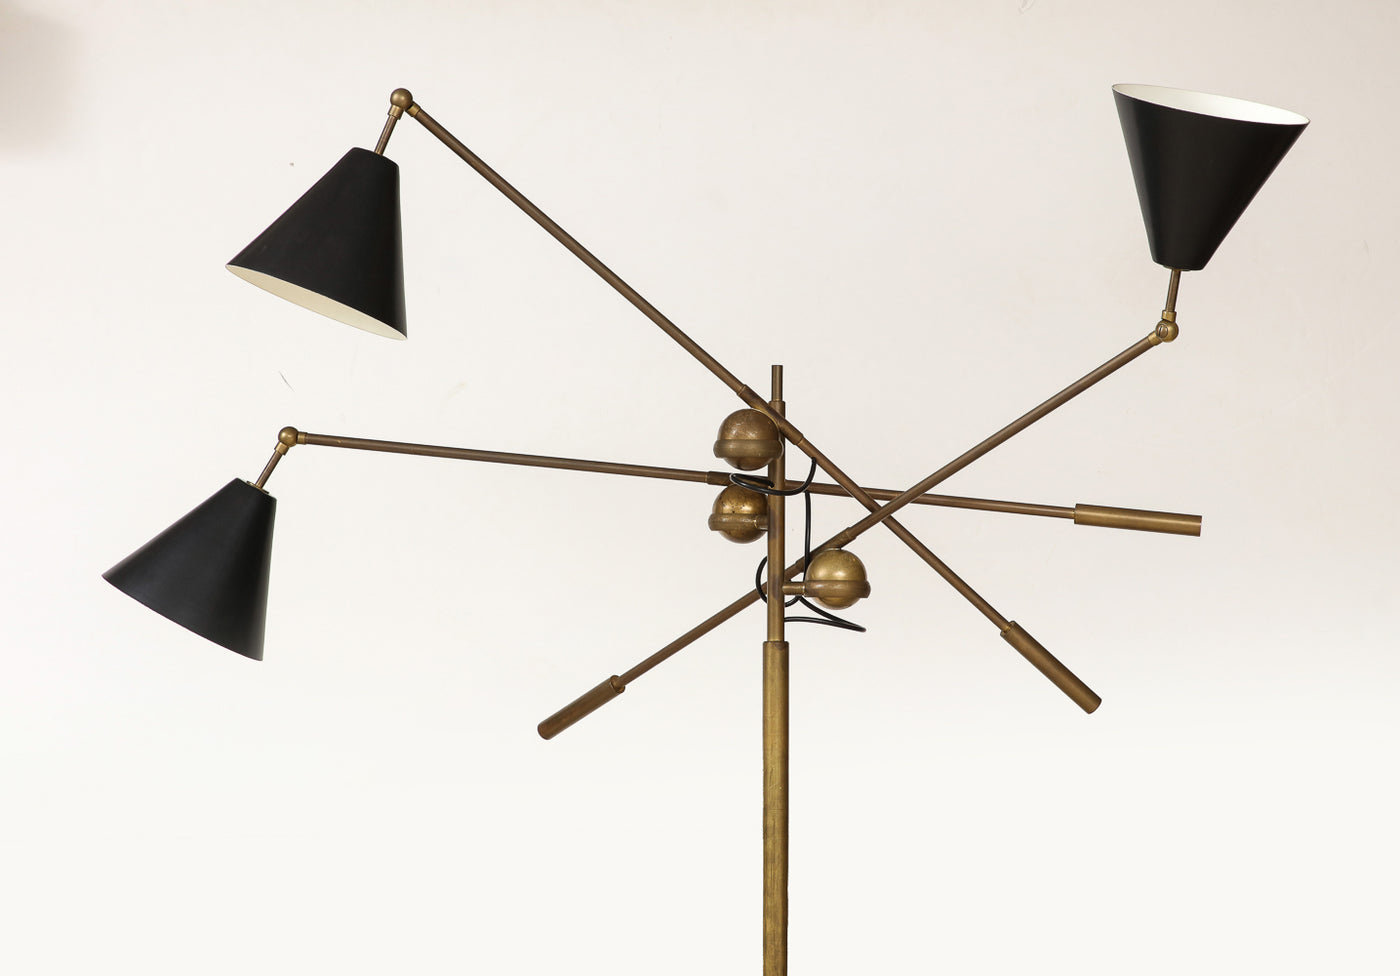 3-Arm Floor lamp by Fedele Papagni